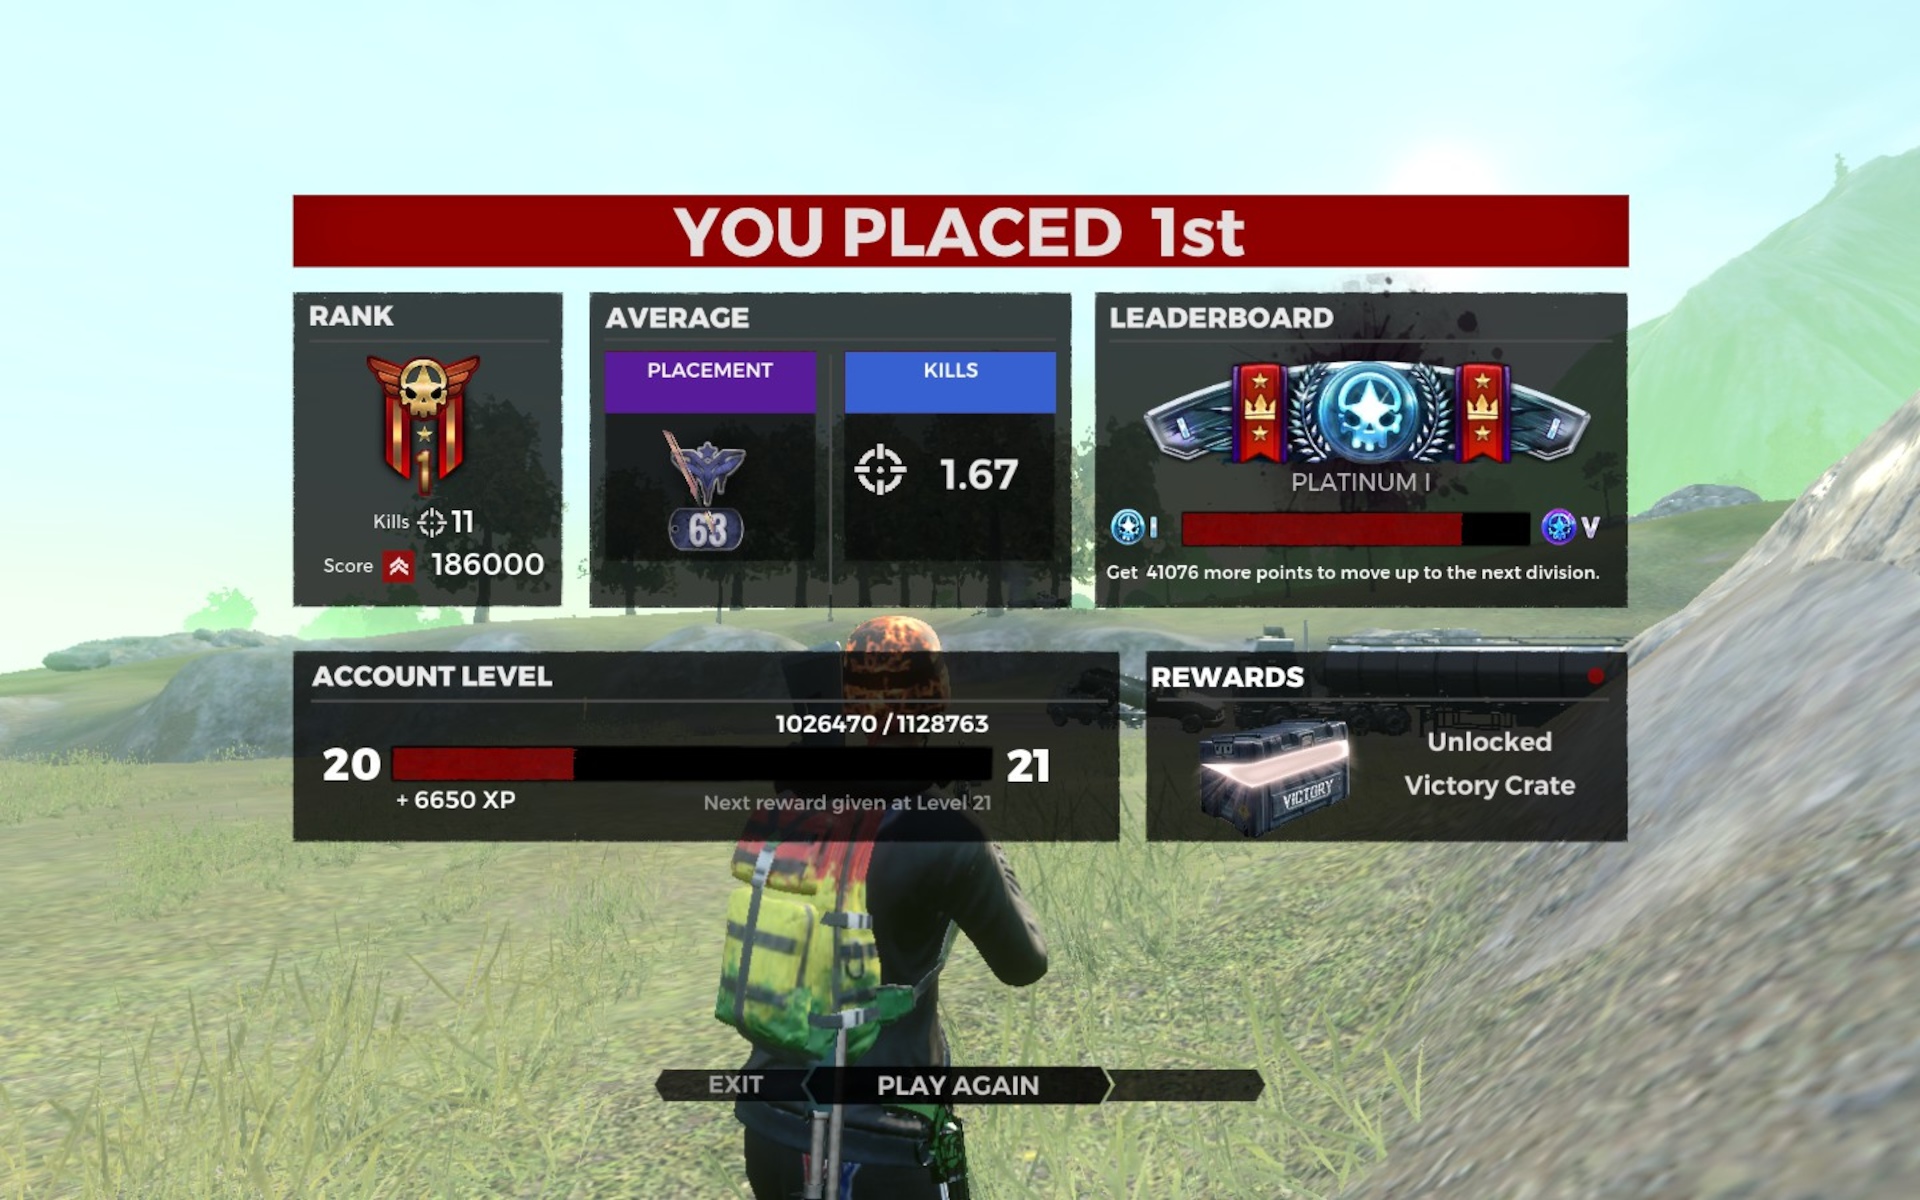 H1Z1 post-match screen showing rewards earned for first place